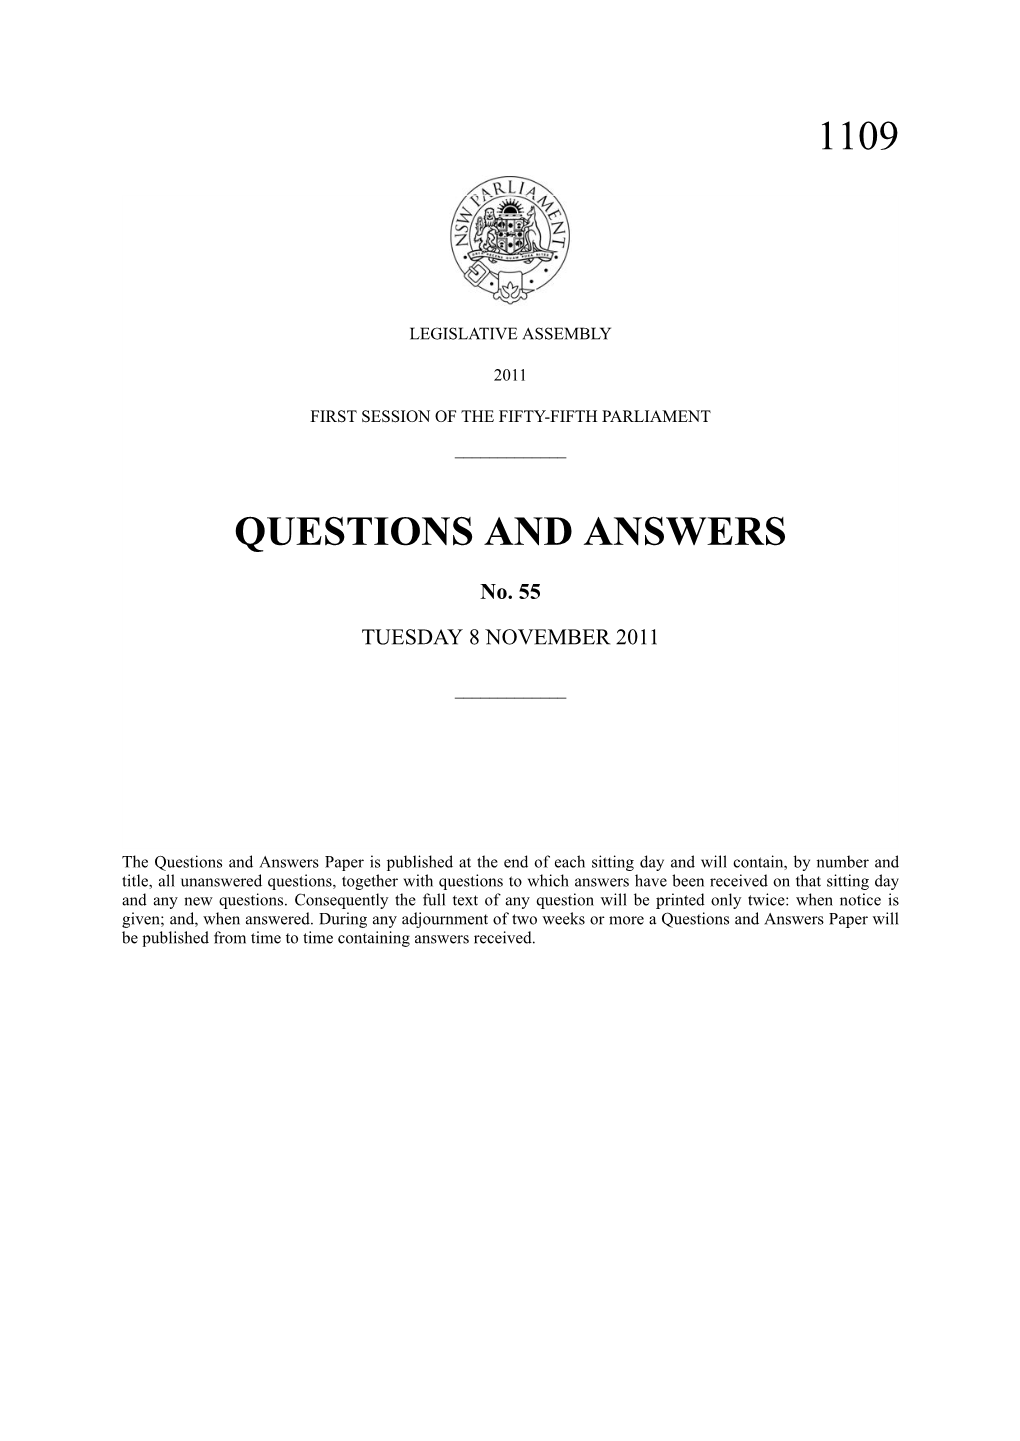 Questions and Answers 1109